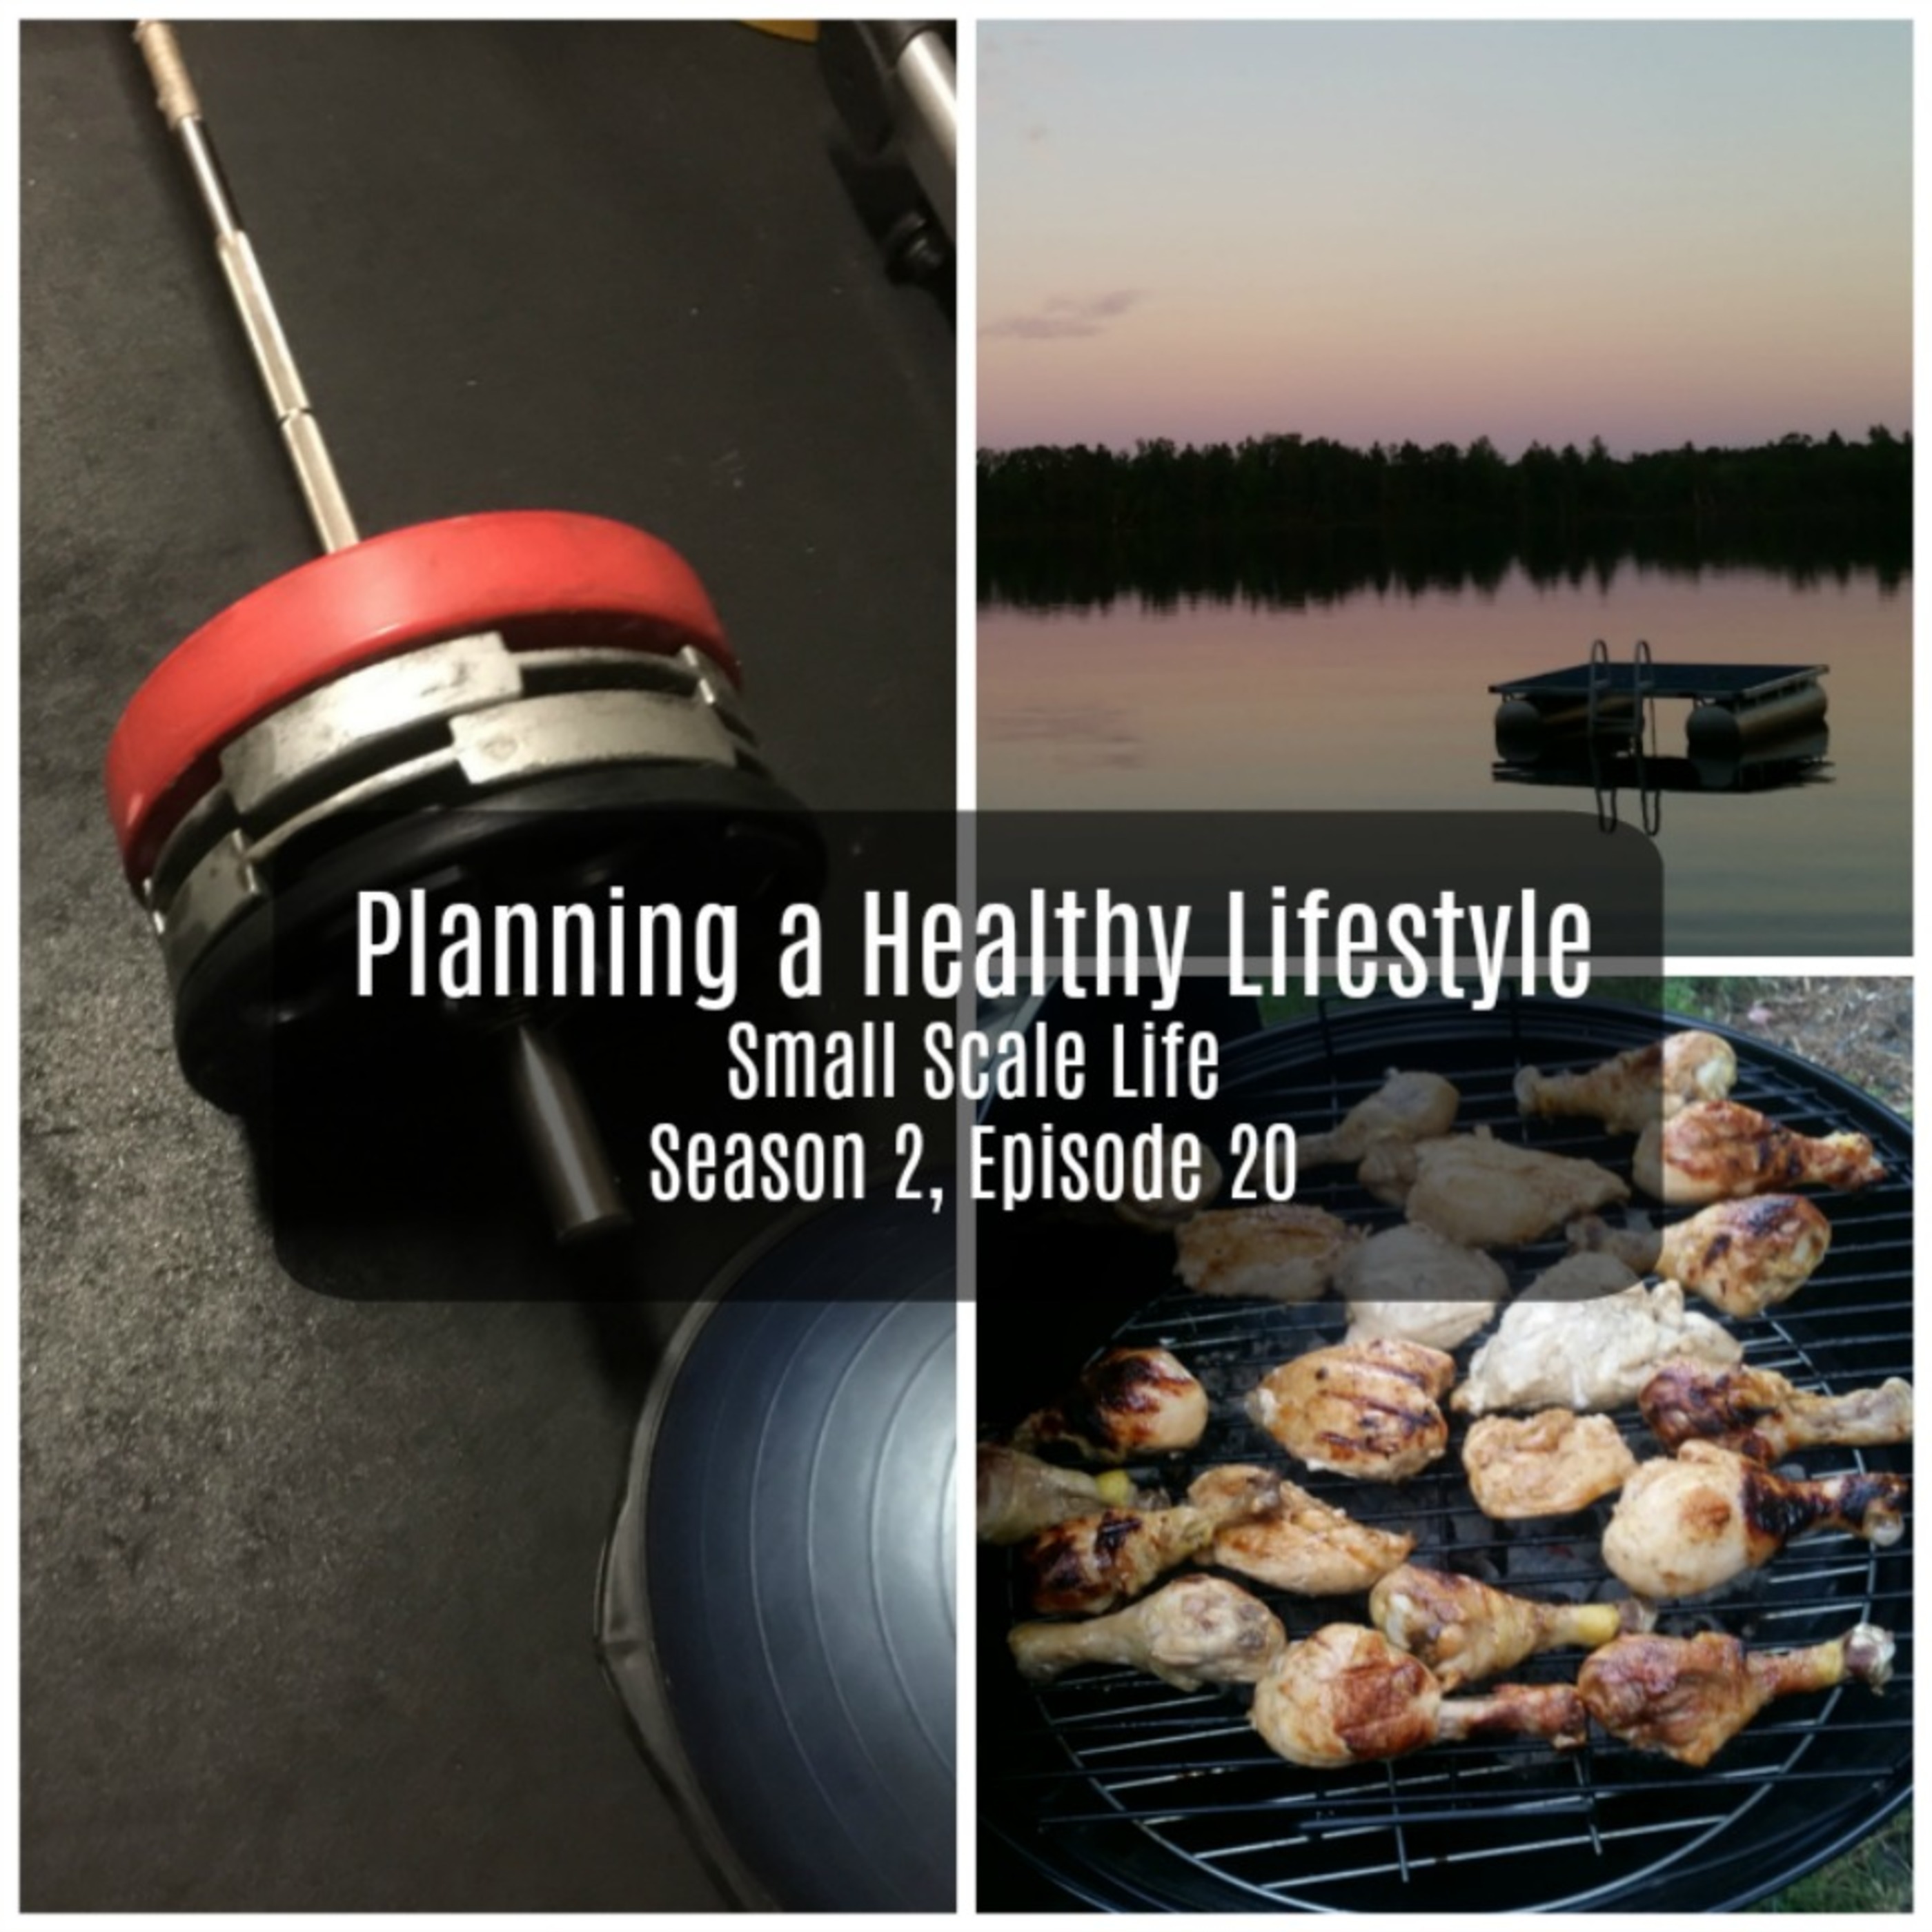 Planning a Healthy Lifestyle - S2E20